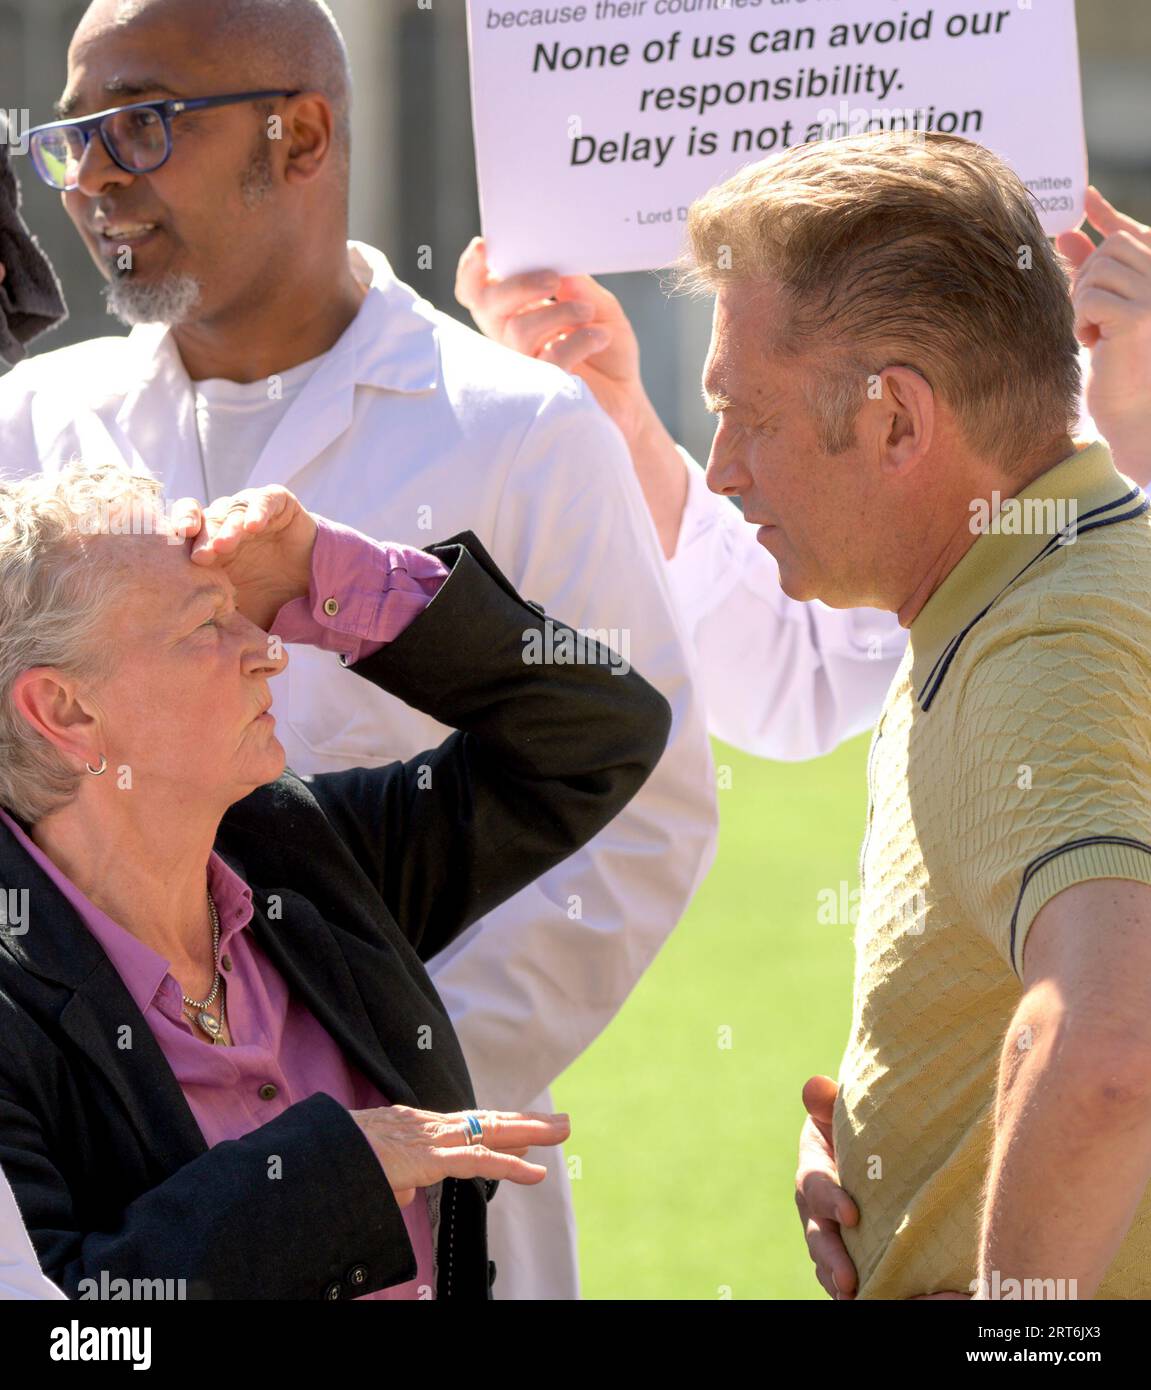 TV presenter Chris Packham and Baroness Jenny Jones (Green Party) are joined by scientists in Parliament Square to protest against the granting of new Stock Photo